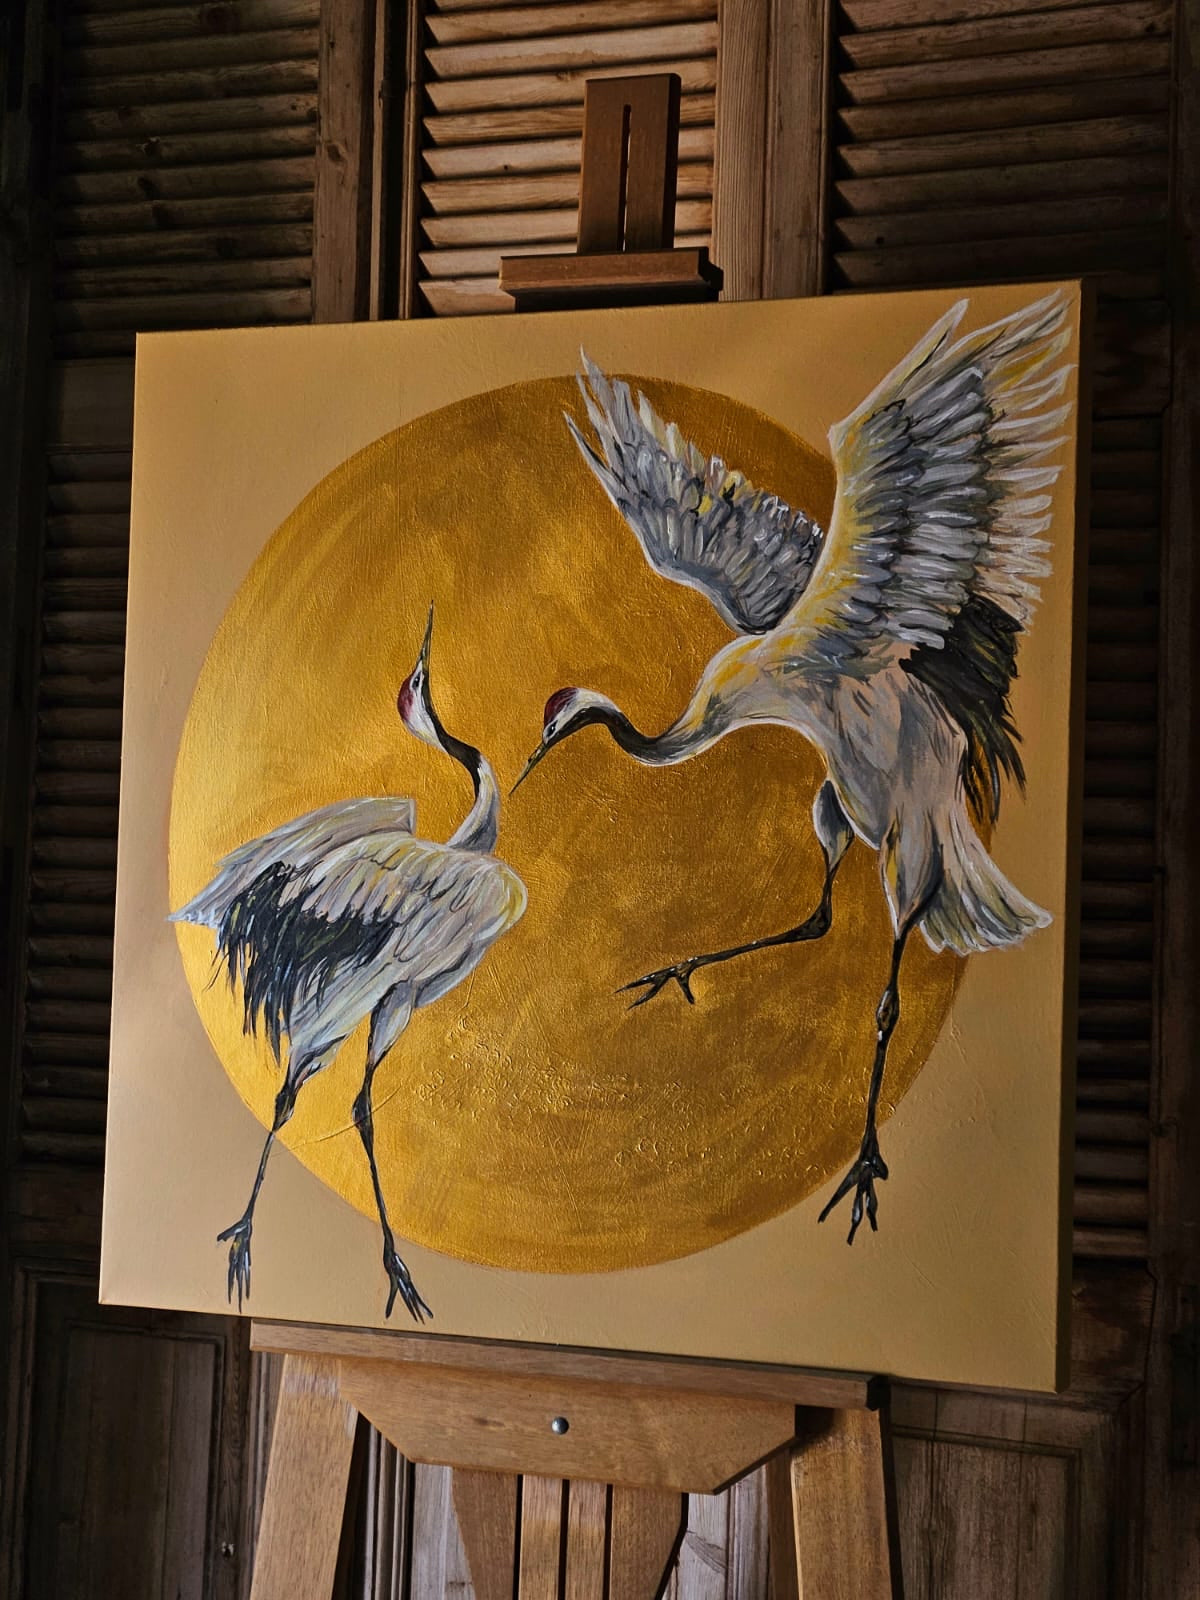 The Dance of the Cranes